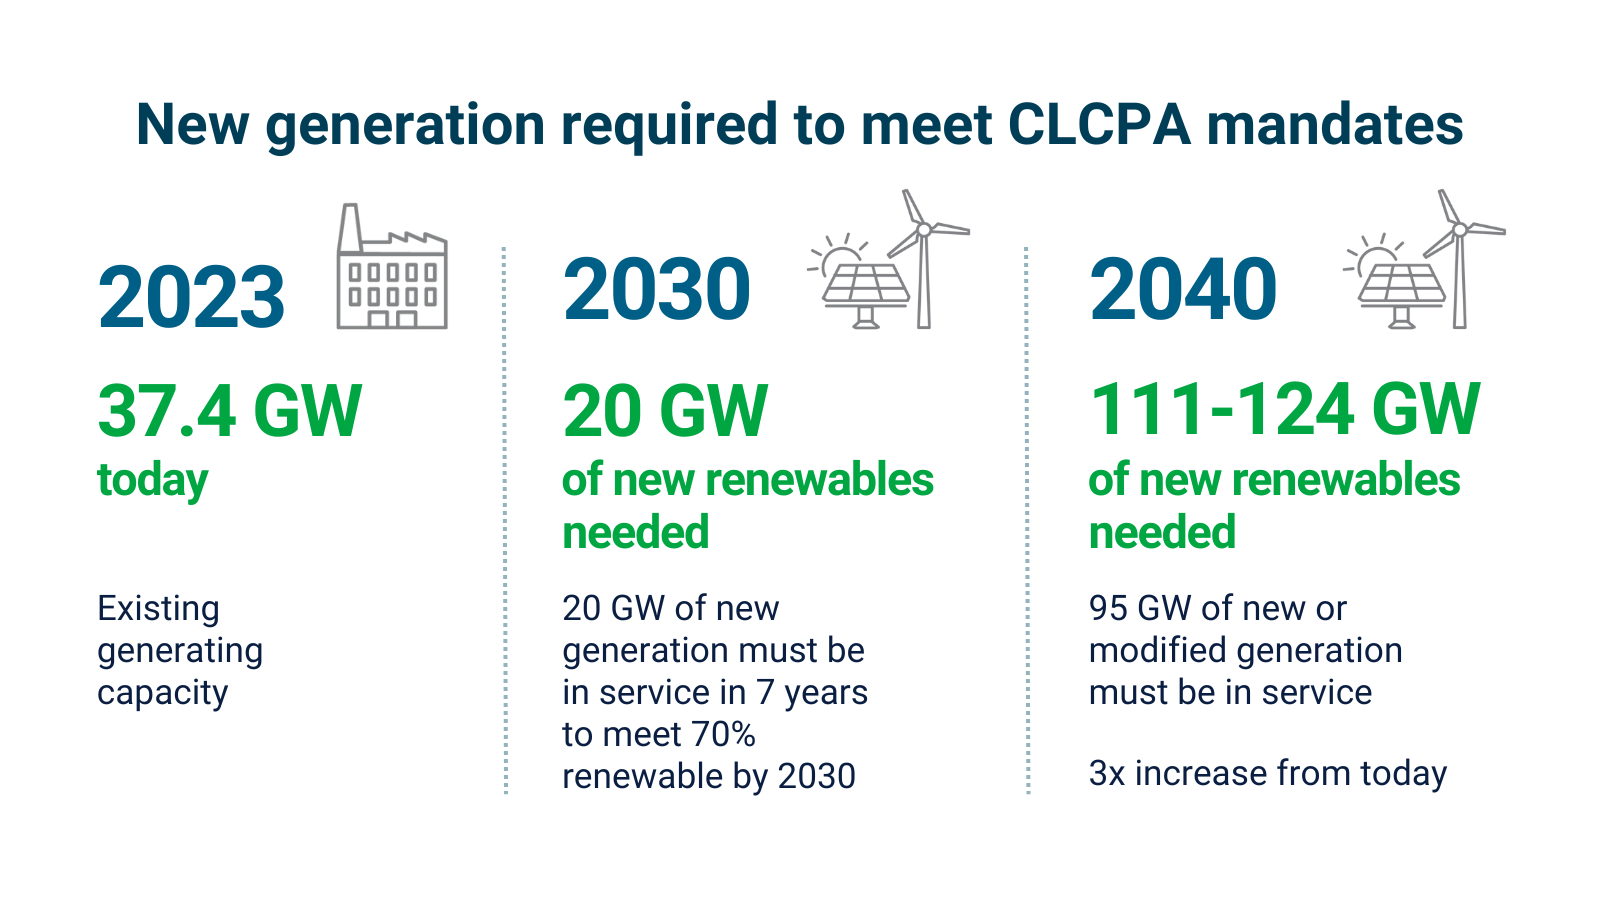 New generation required to meet CLCPA mandates